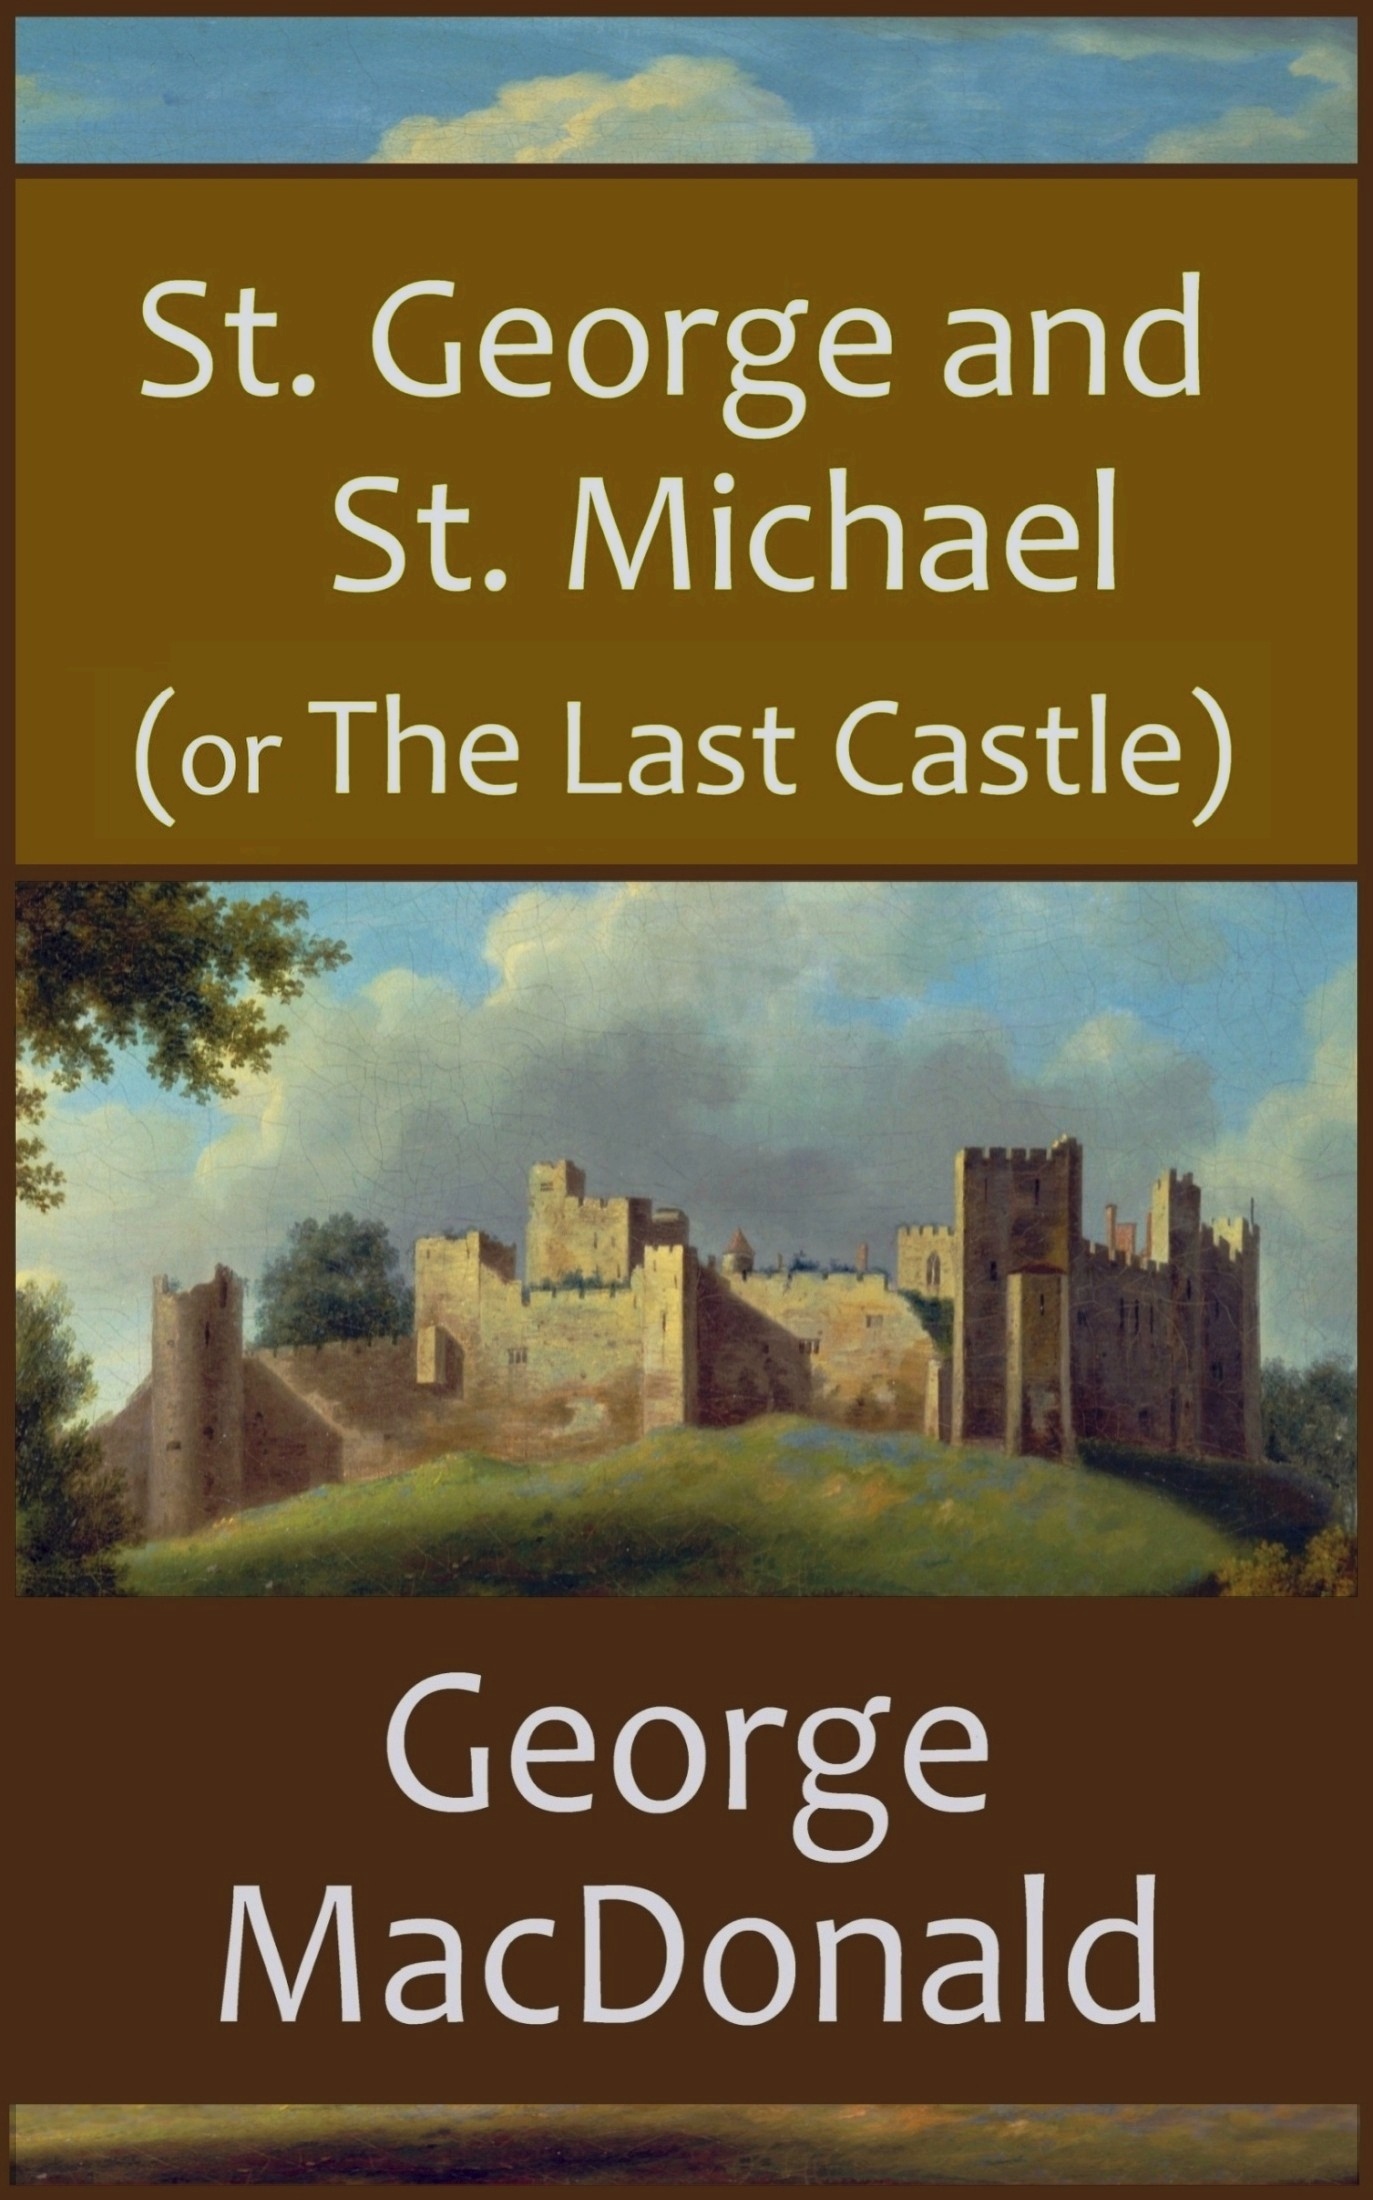 Book cover image for St. George and St. Michael, by George MacDonald